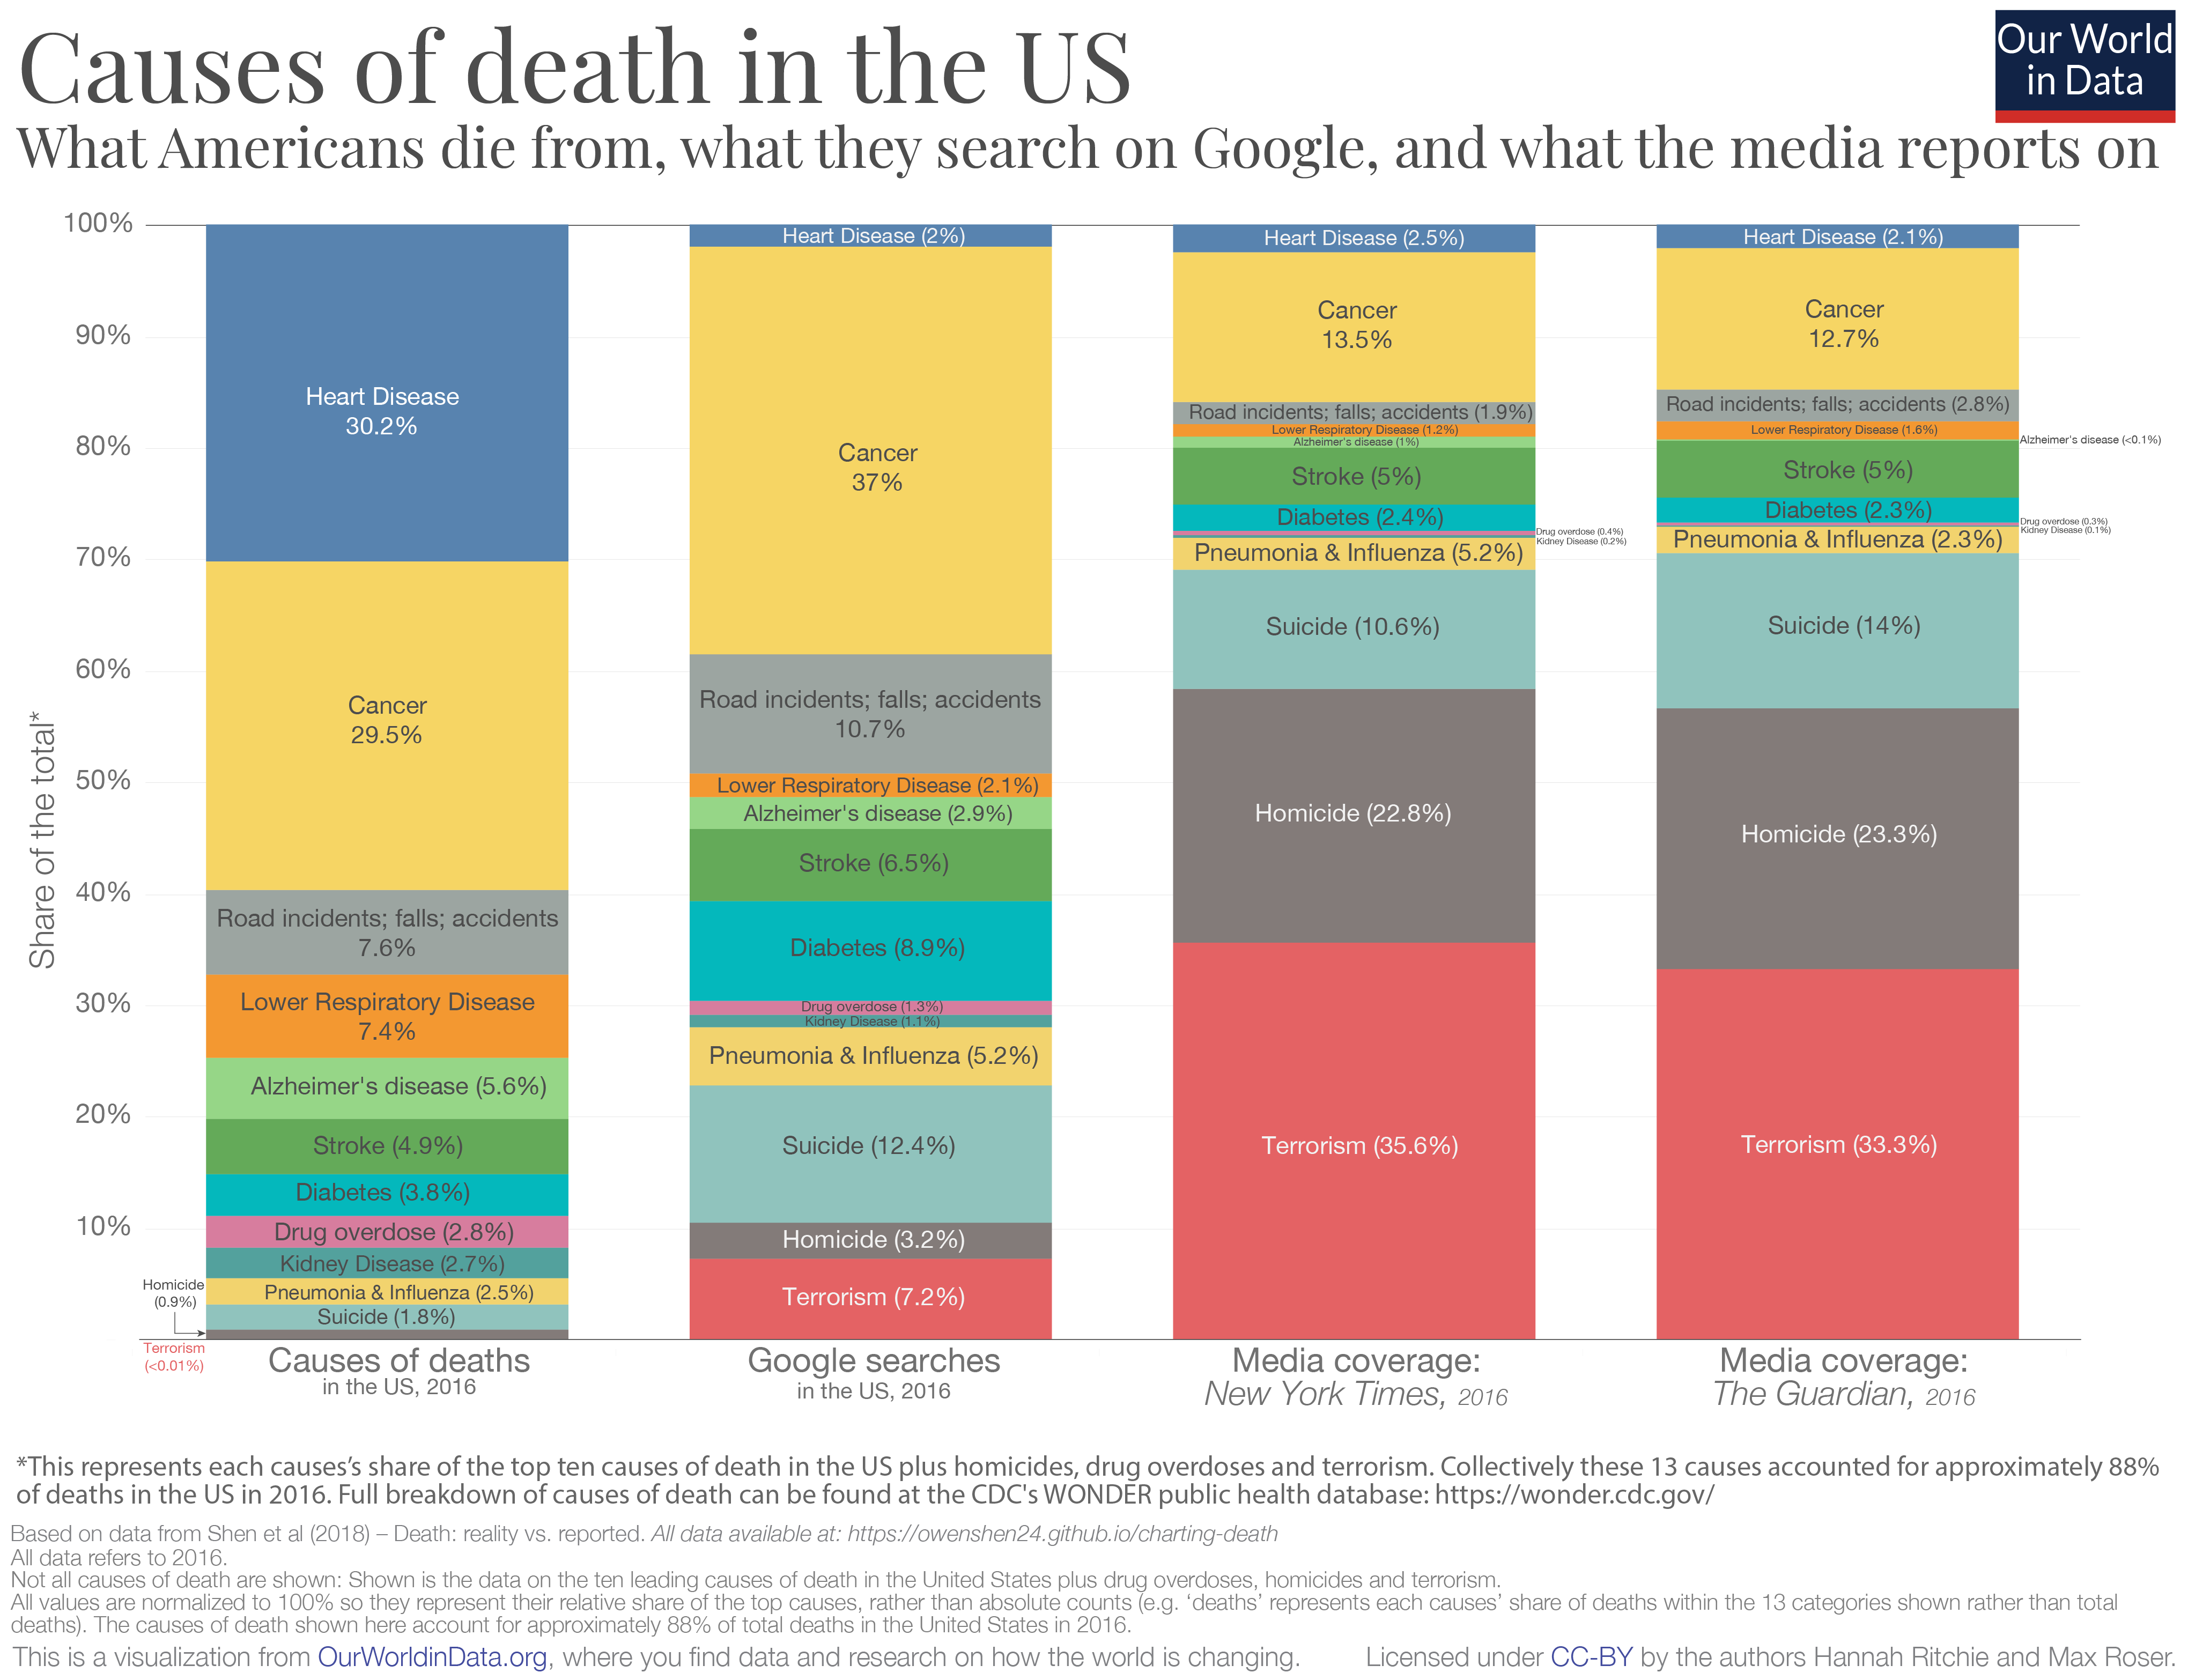 Causes of death in the U.S.